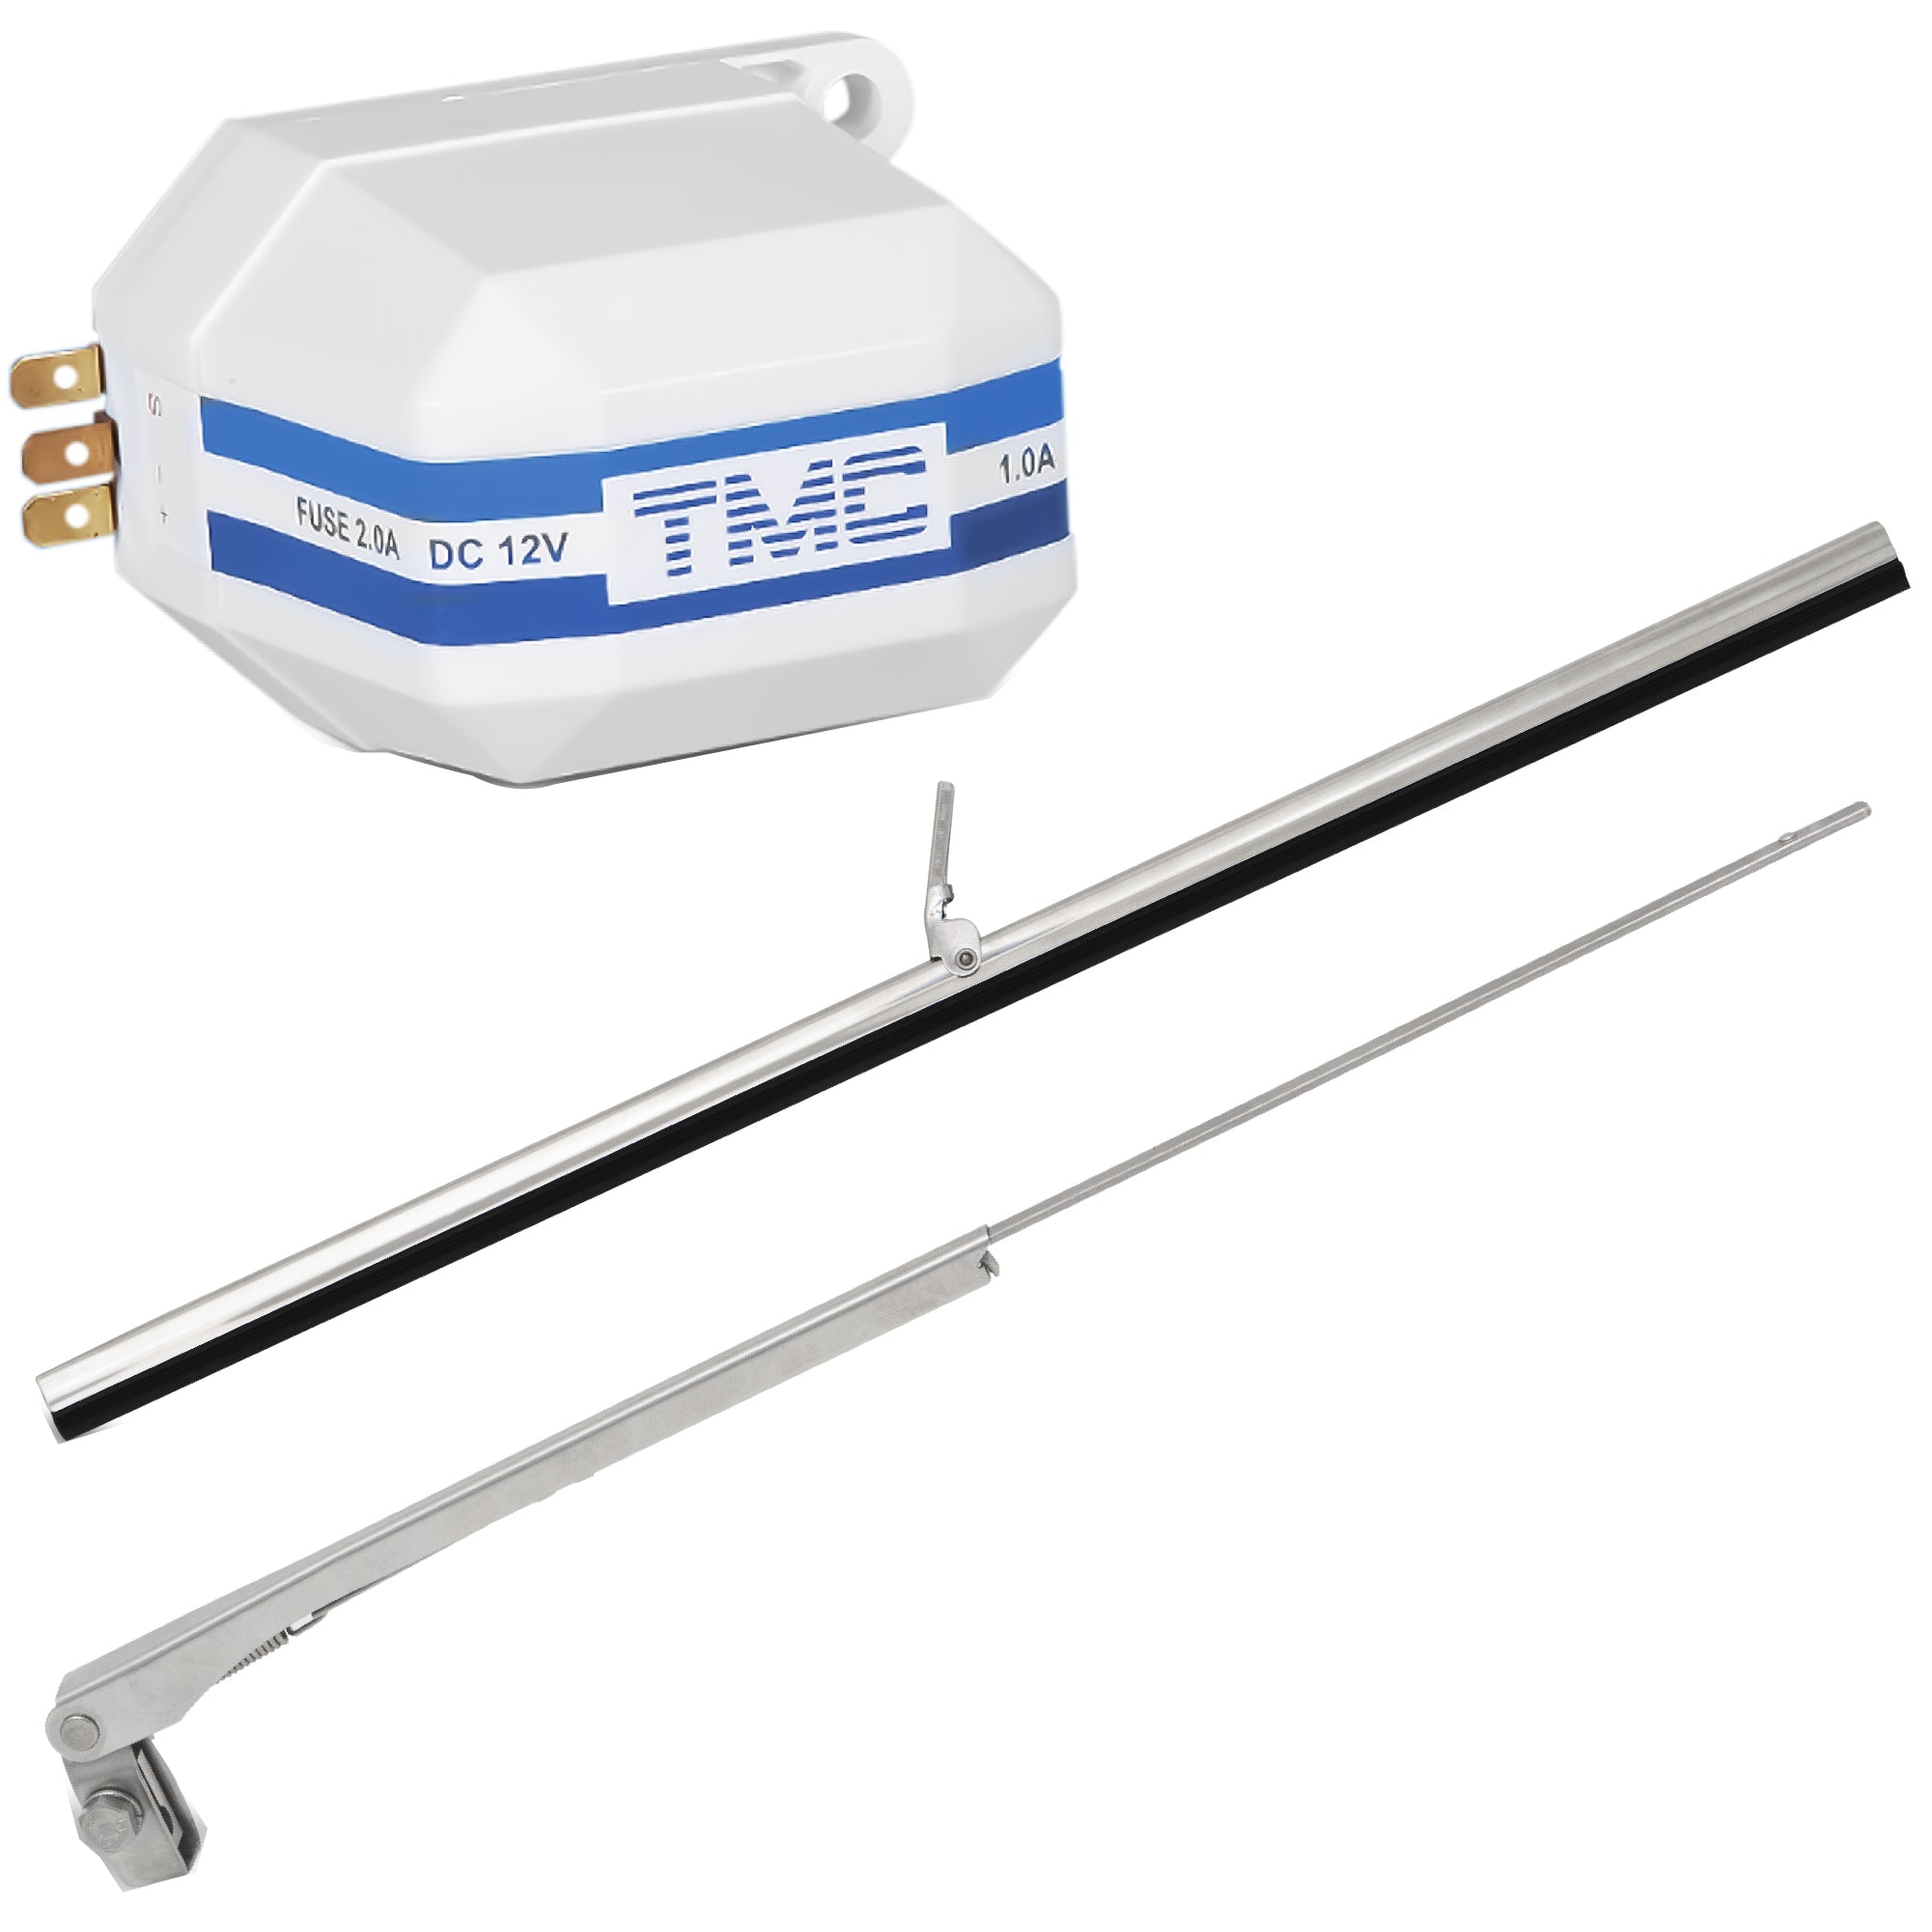 TMC Windshield Complete System Kit - FO745-C2